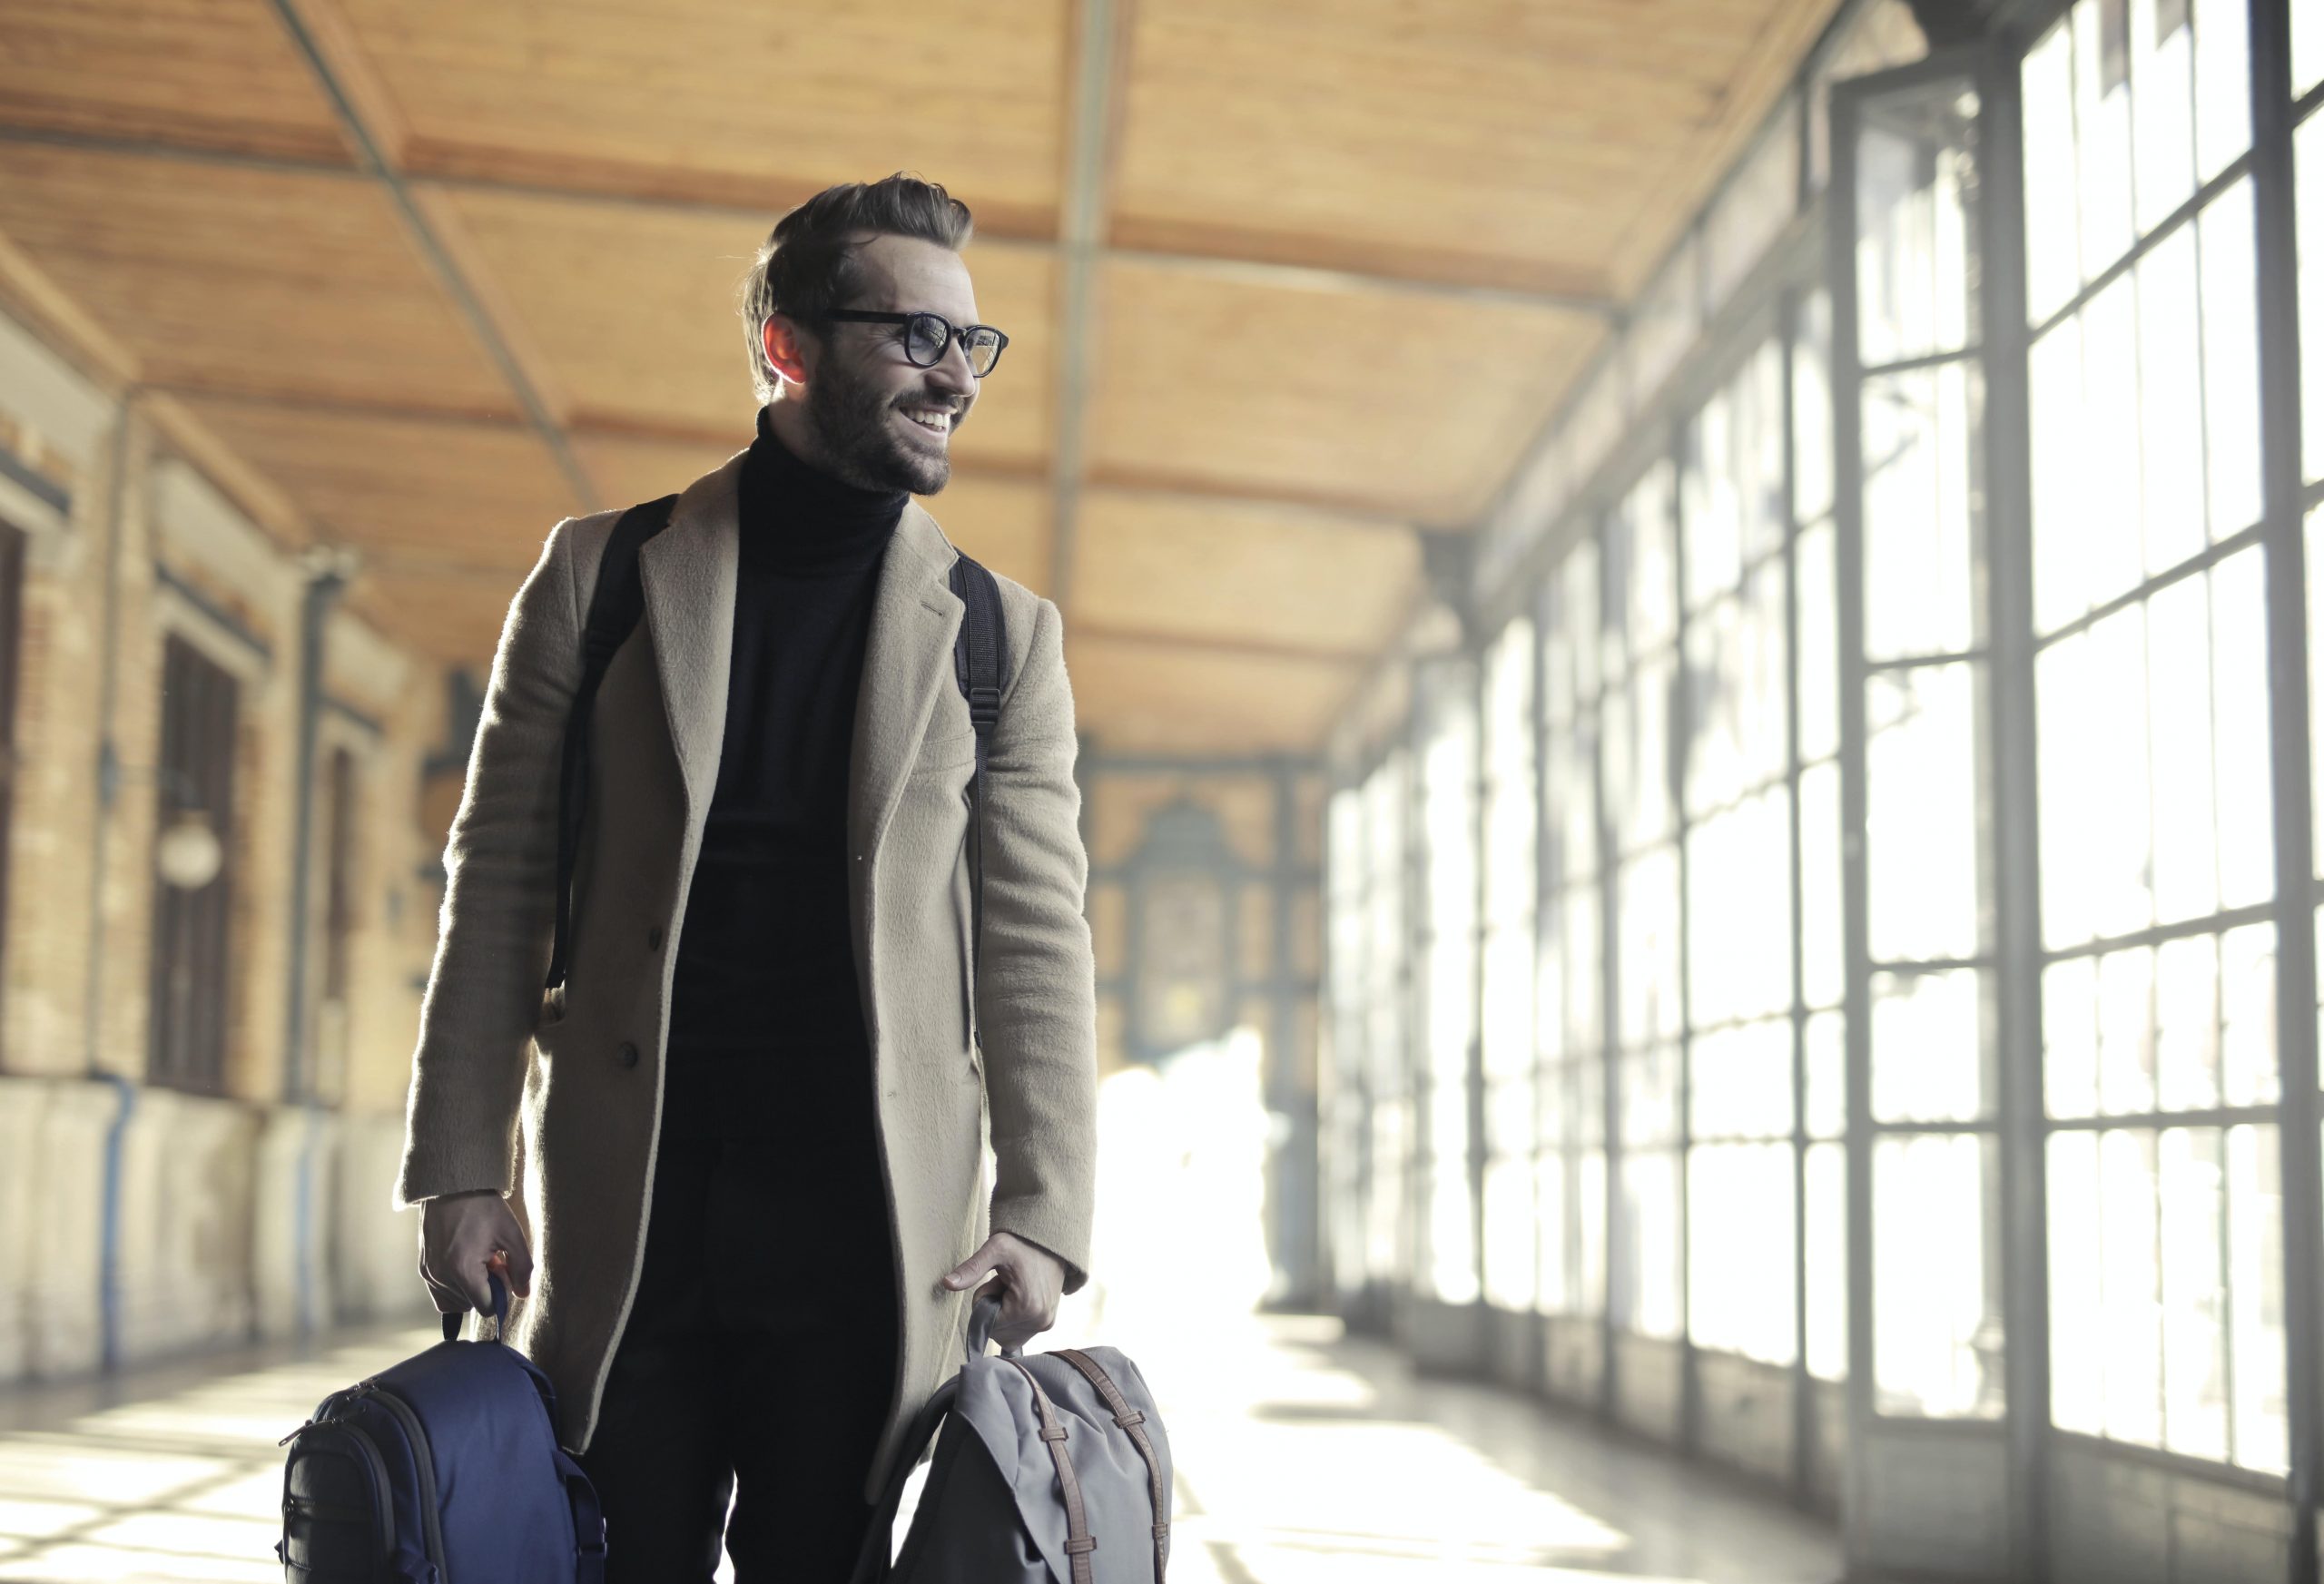 Airport Clothes Tips – What to Wear to the Airport